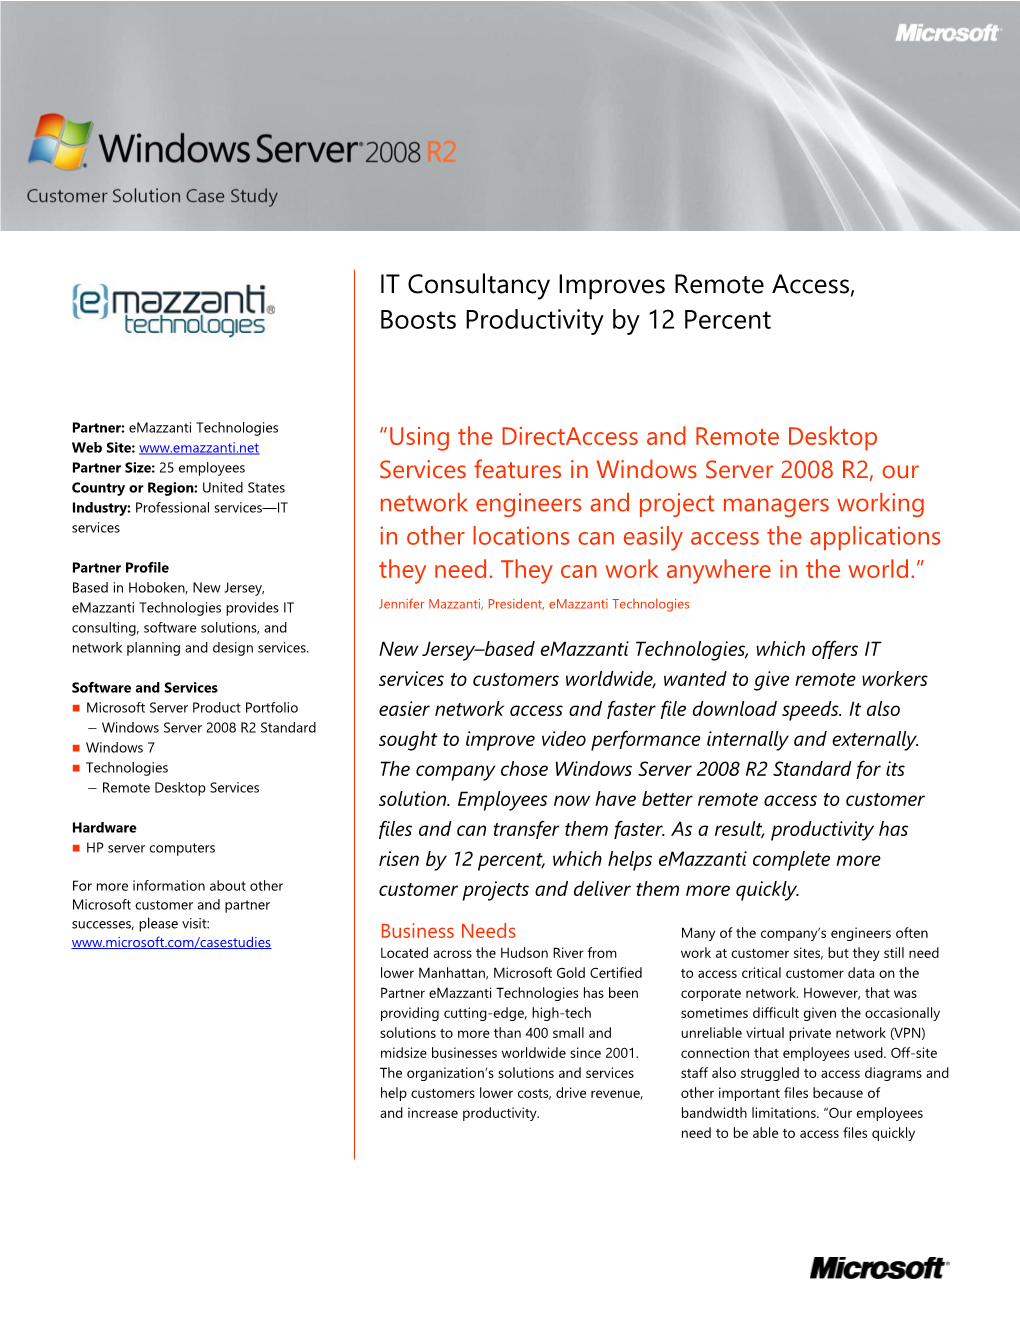 Metia 2008 Product IT Consultant Improves Remote Access, Boosts Productivity by 12 Percent